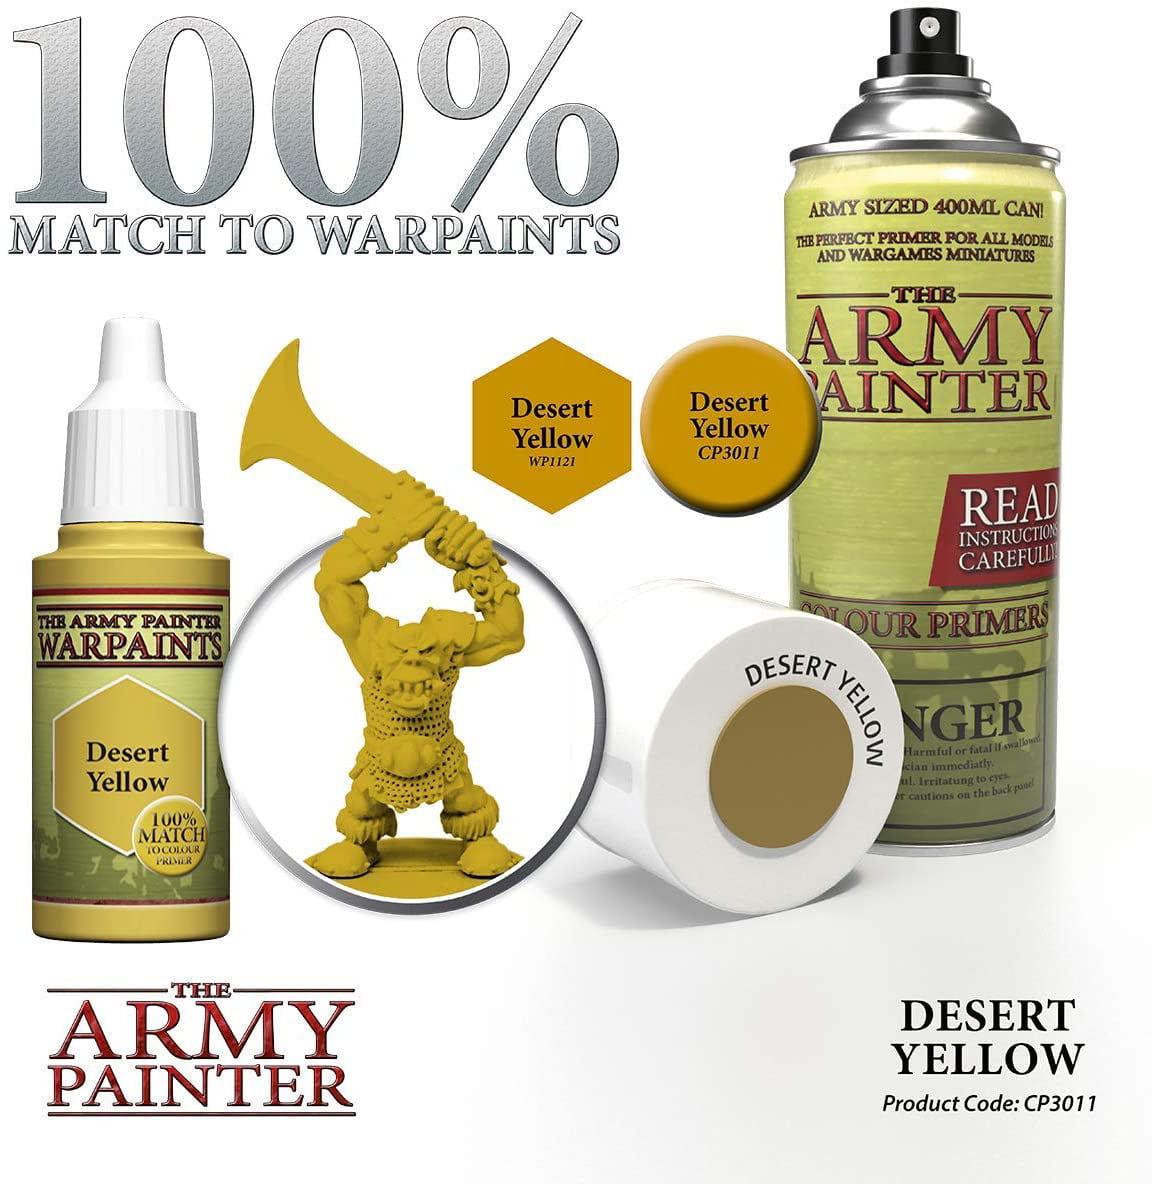 Using Army Painter Spray primer, any way to avoid this chalky